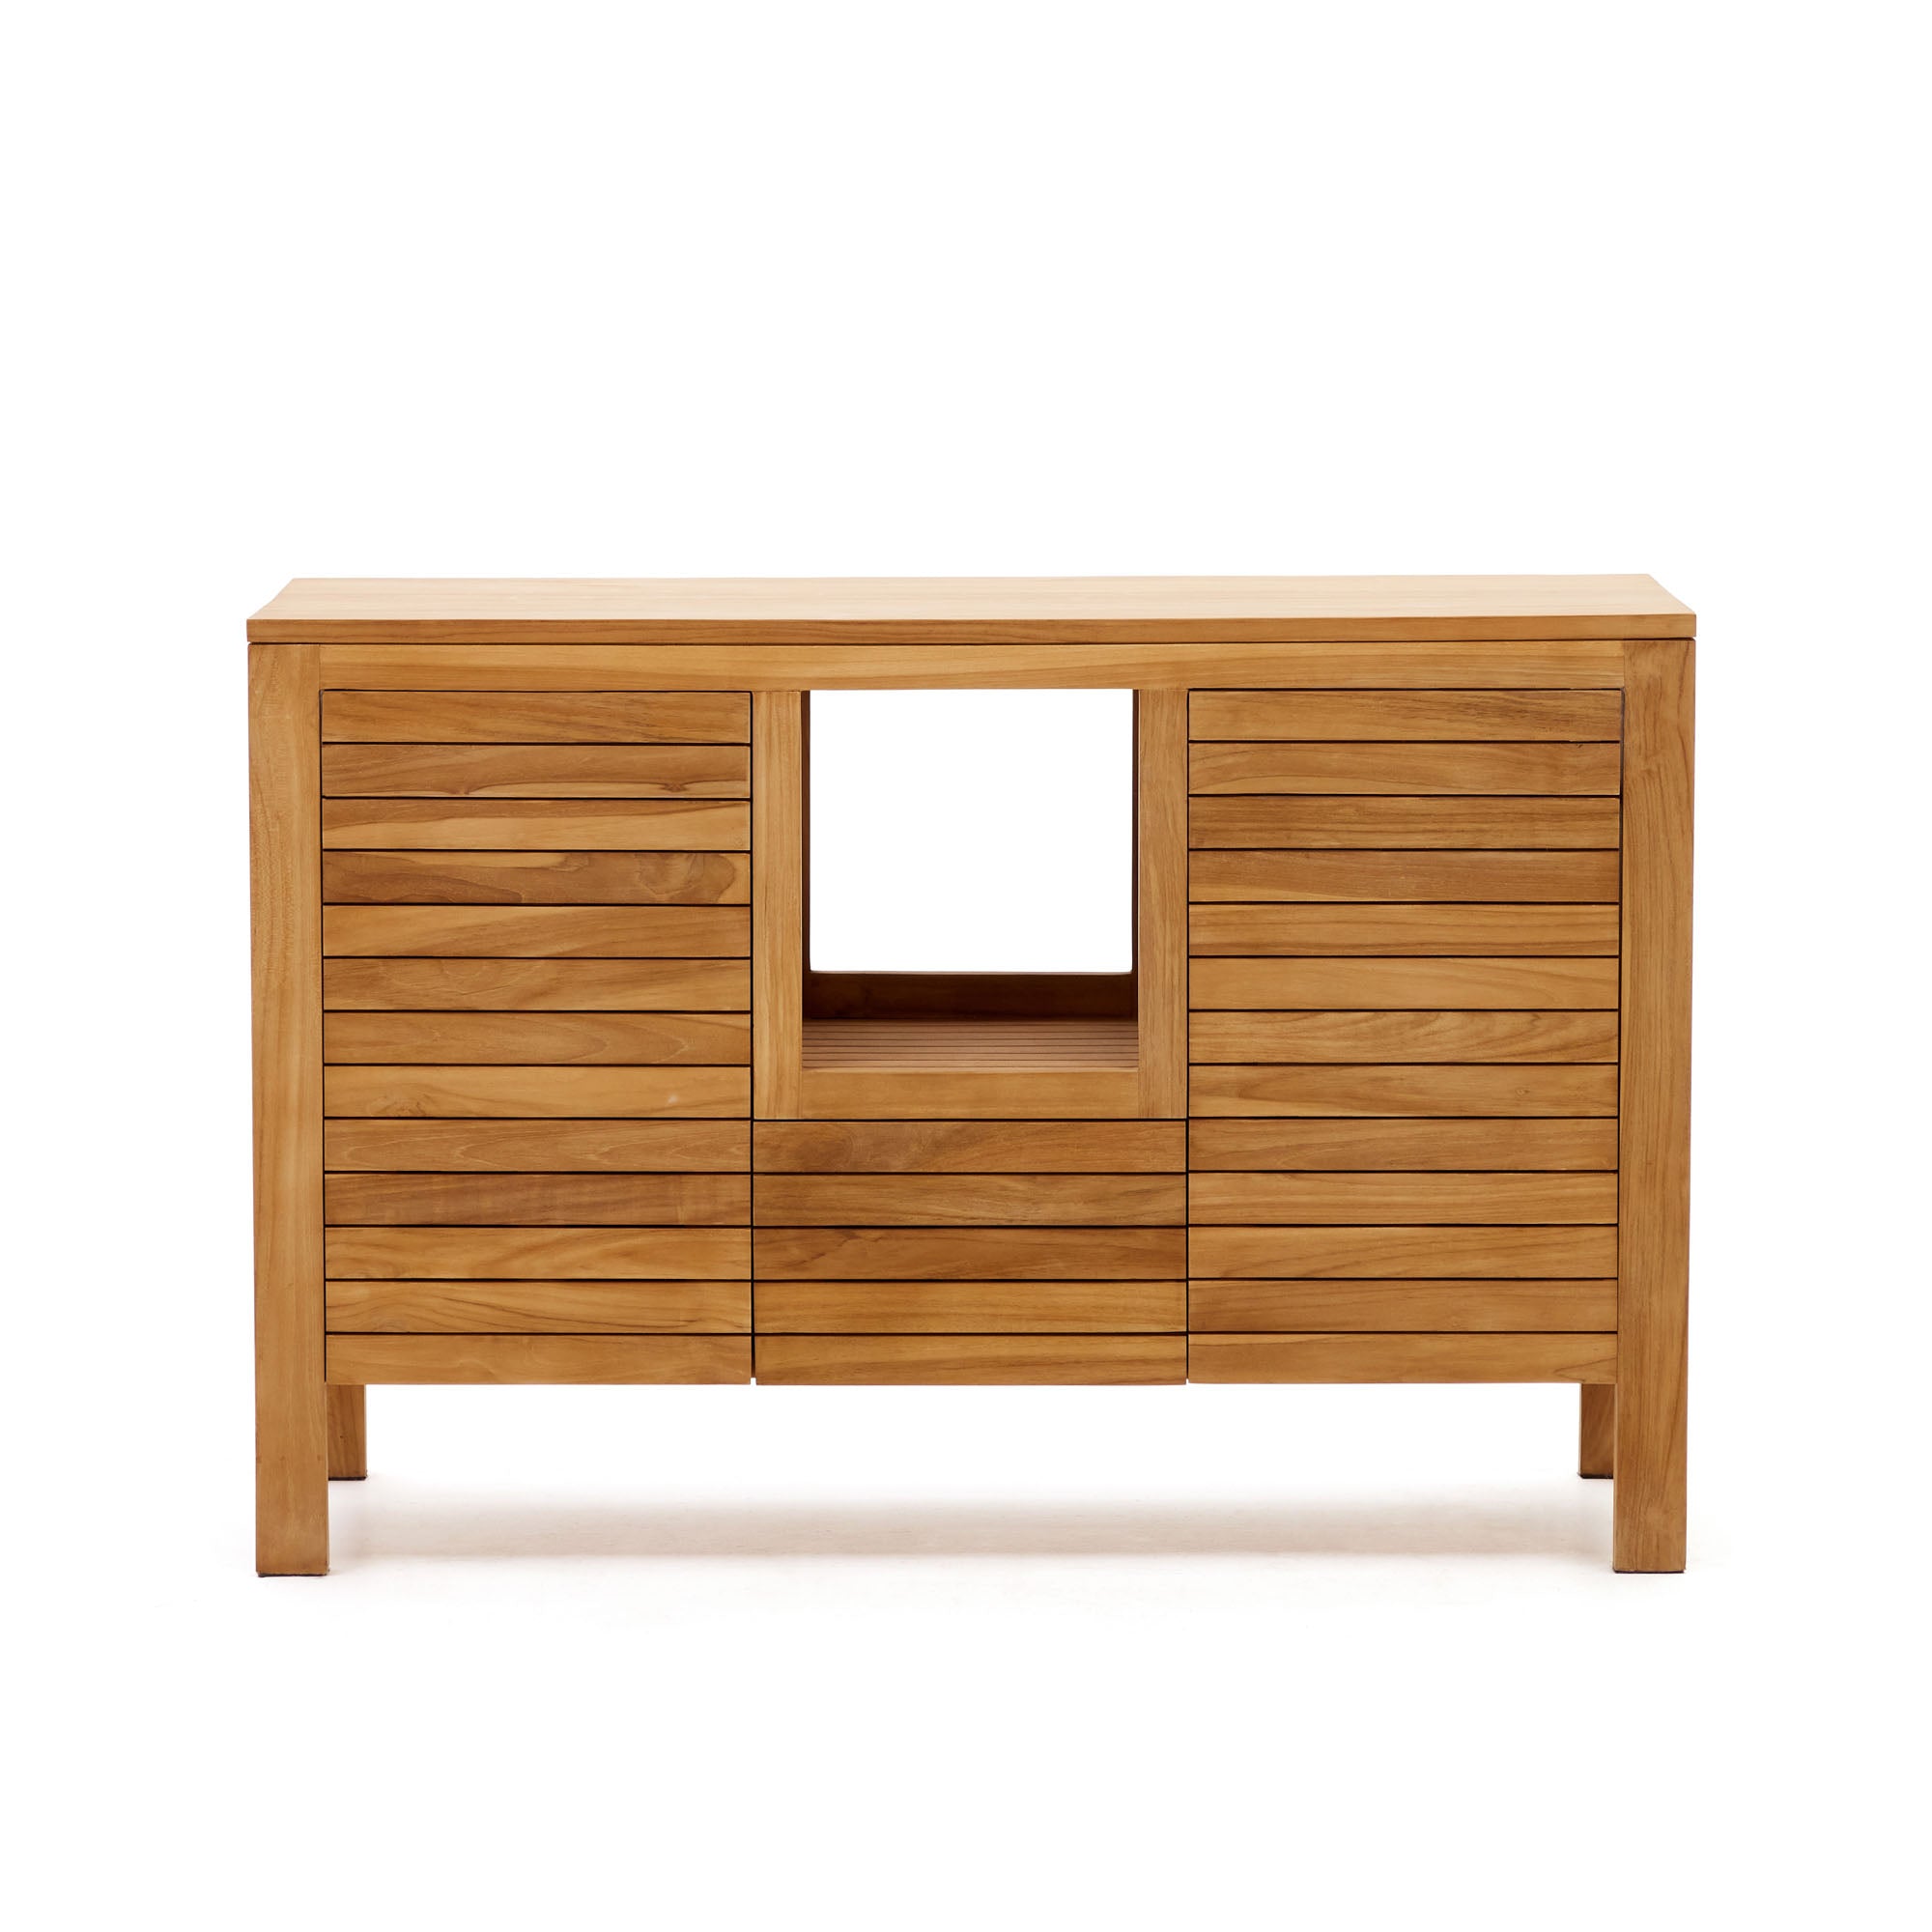 Neria bathroom furniture in solid teak wood with natural finish, 120 x 45 cm